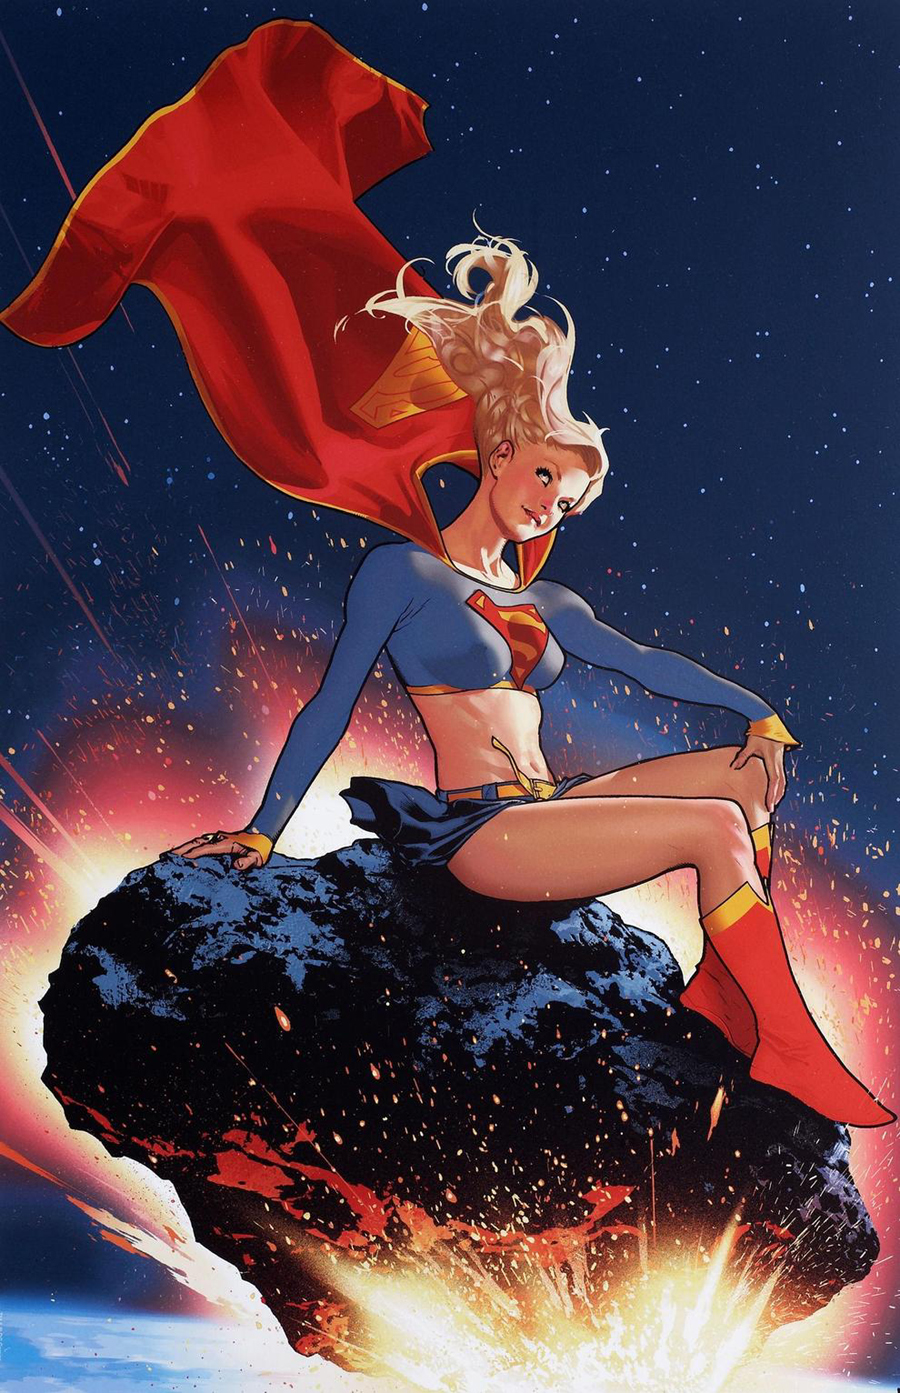 Cover art for “Supergirl and the Legion of Super-Heroes,” Vol. 1 #23, December 2006 (variant)